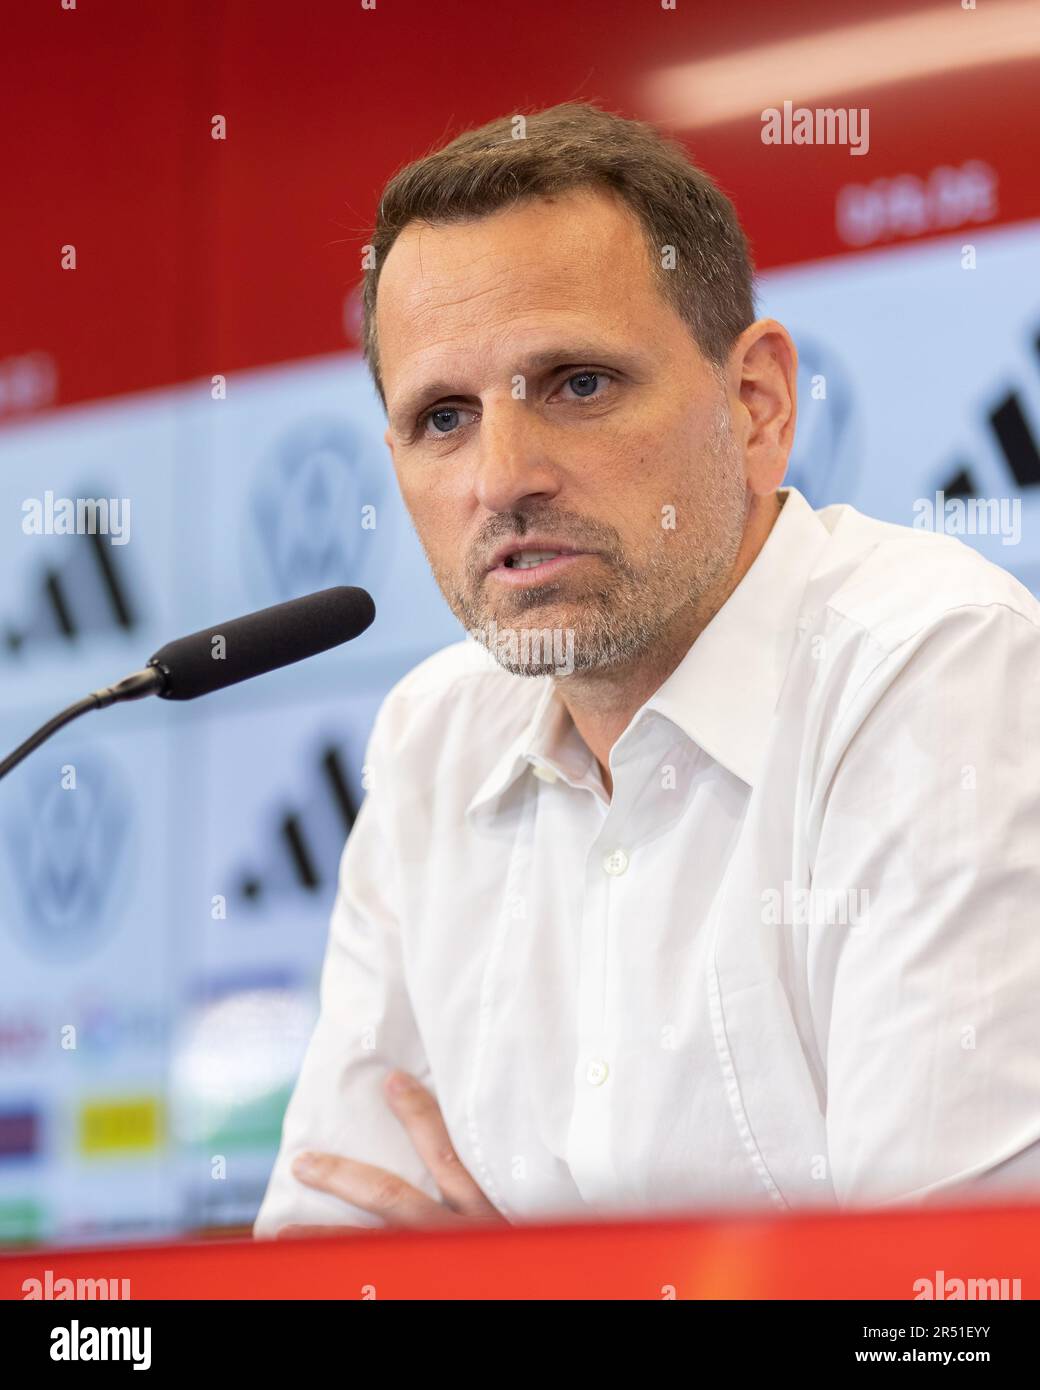 Frankfurt Am Main, Germany. 31st May, 2023. Soccer: Women, national team, Germany, press conference with announcement of preliminary World Cup squad at DFB campus. Panagiotis Chatzialexiou, Sporting Director National Teams, speaks to media representatives at the press conference. Credit: Jürgen Kessler/dpa/Alamy Live News Stock Photo